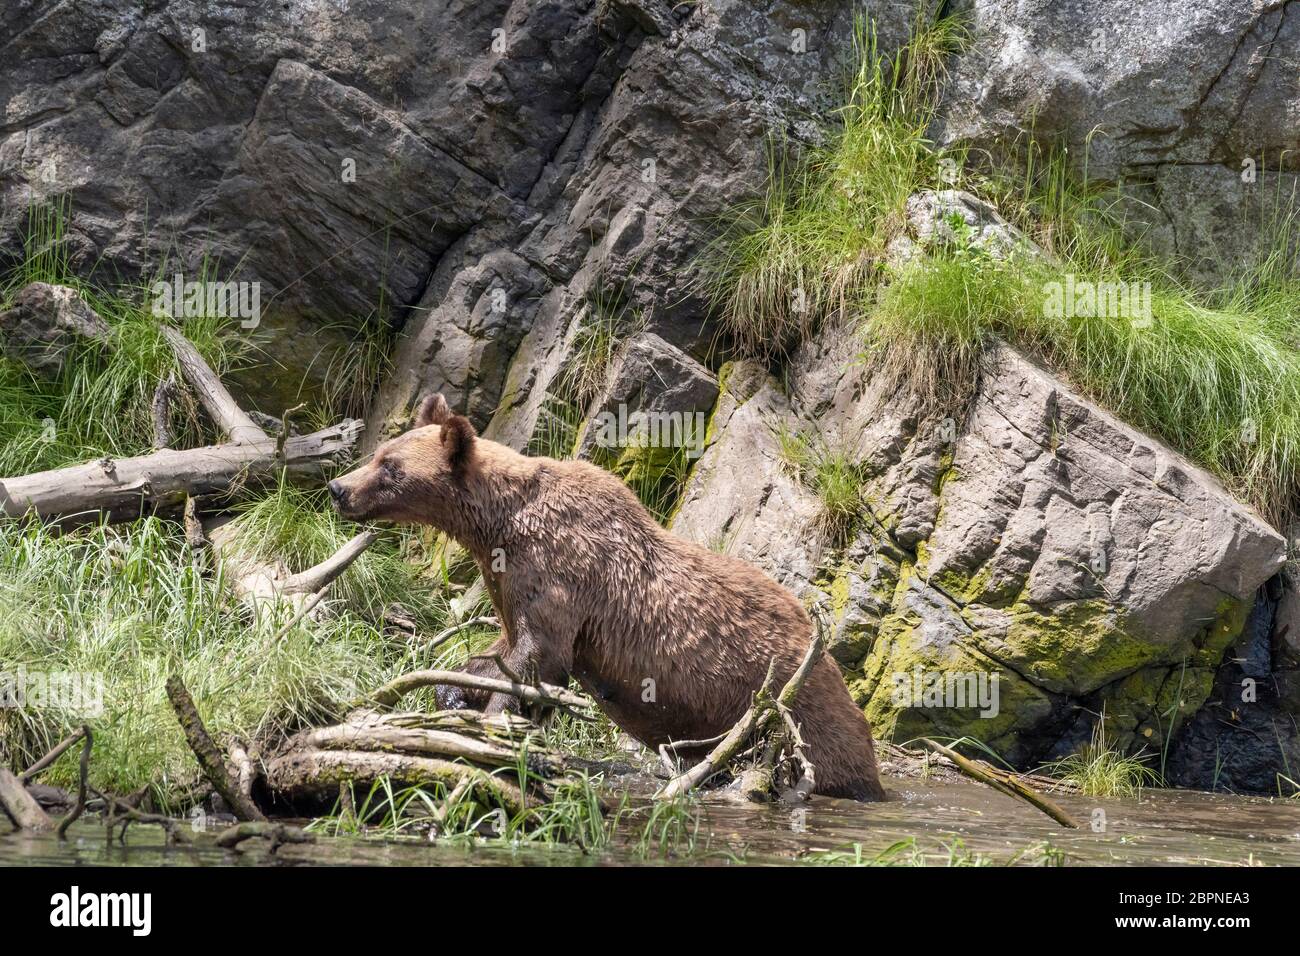 Adult grizzly bear climbing out of the water, Khutzeymateen, BC Stock Photo